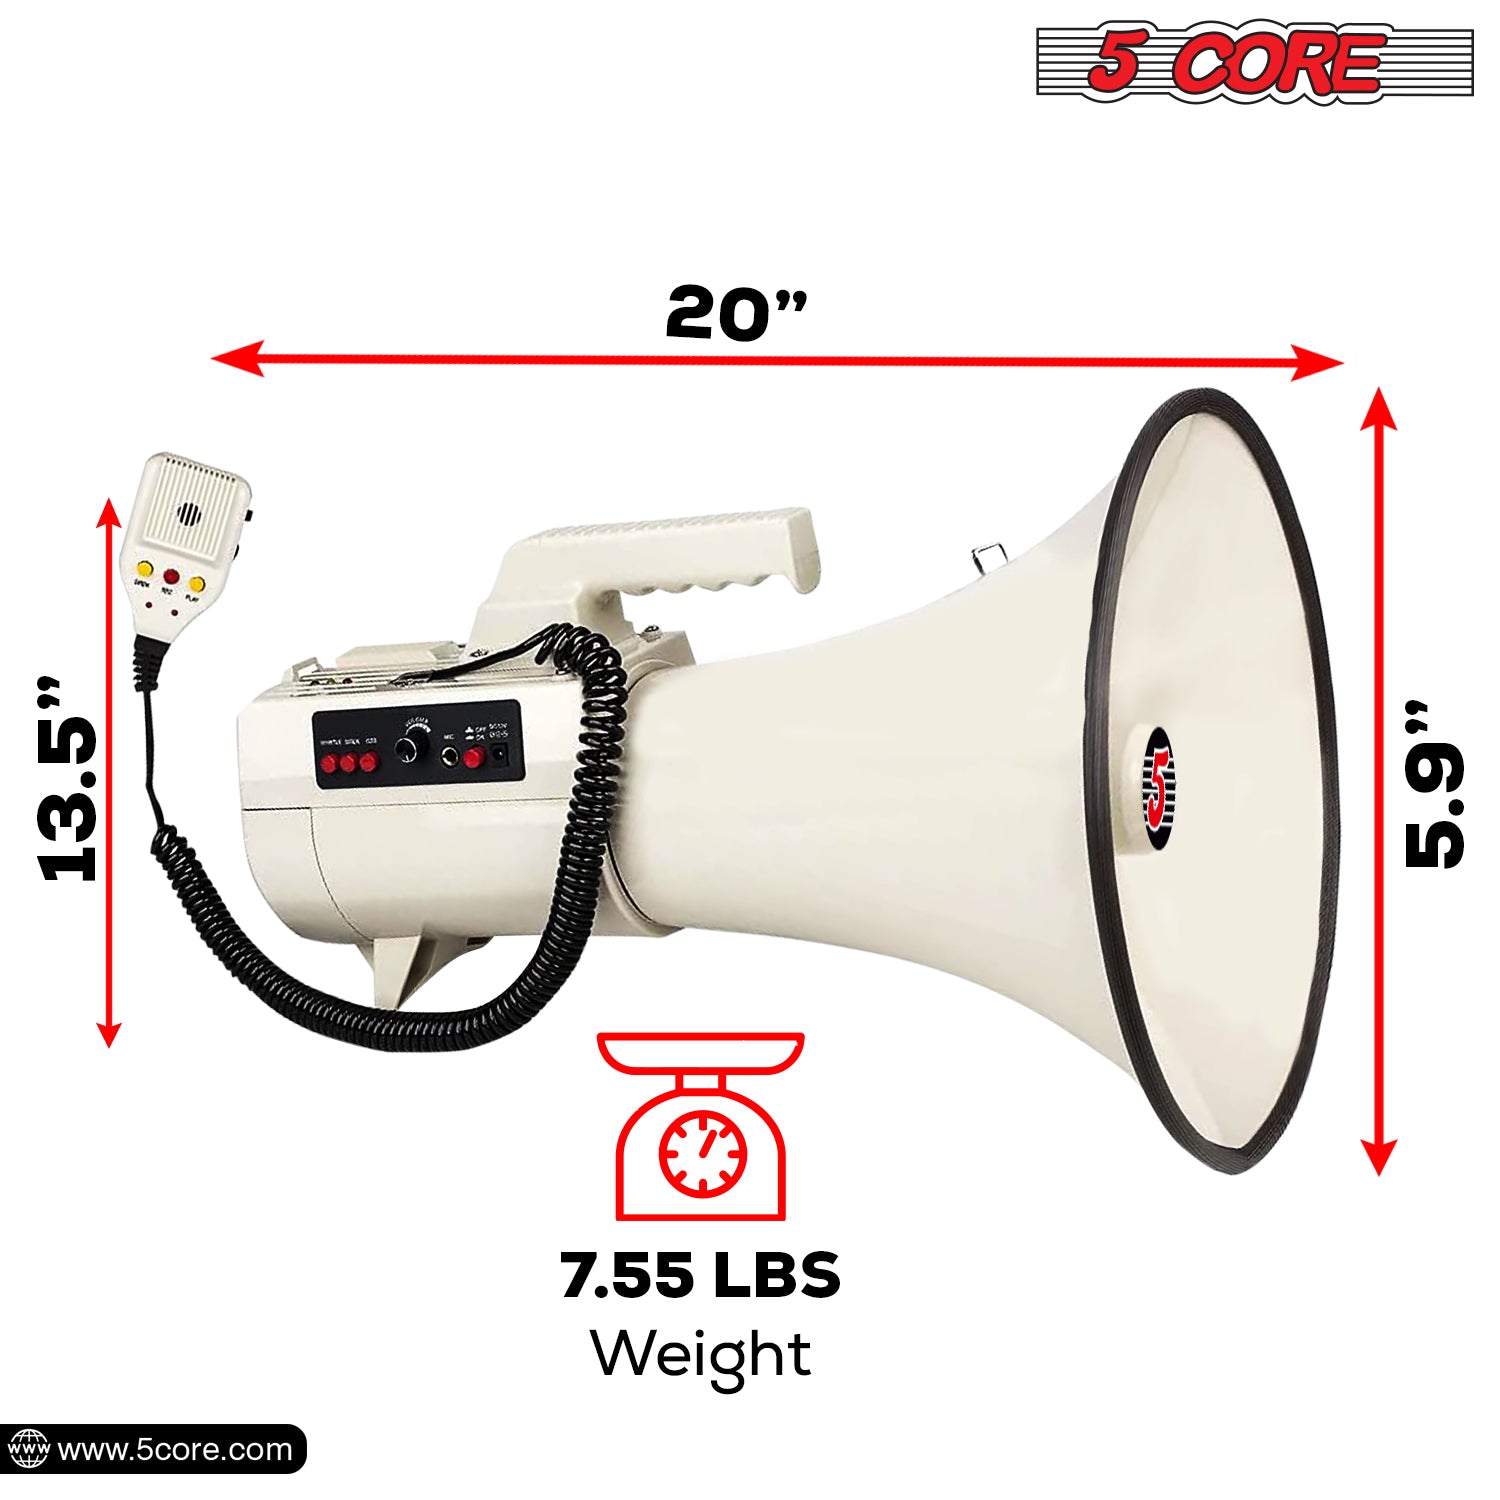 5 Core Megaphone with 100W Power: PA Bullhorn with USB Charging and Siren Feature for Clear Long-Range Sound Projection.